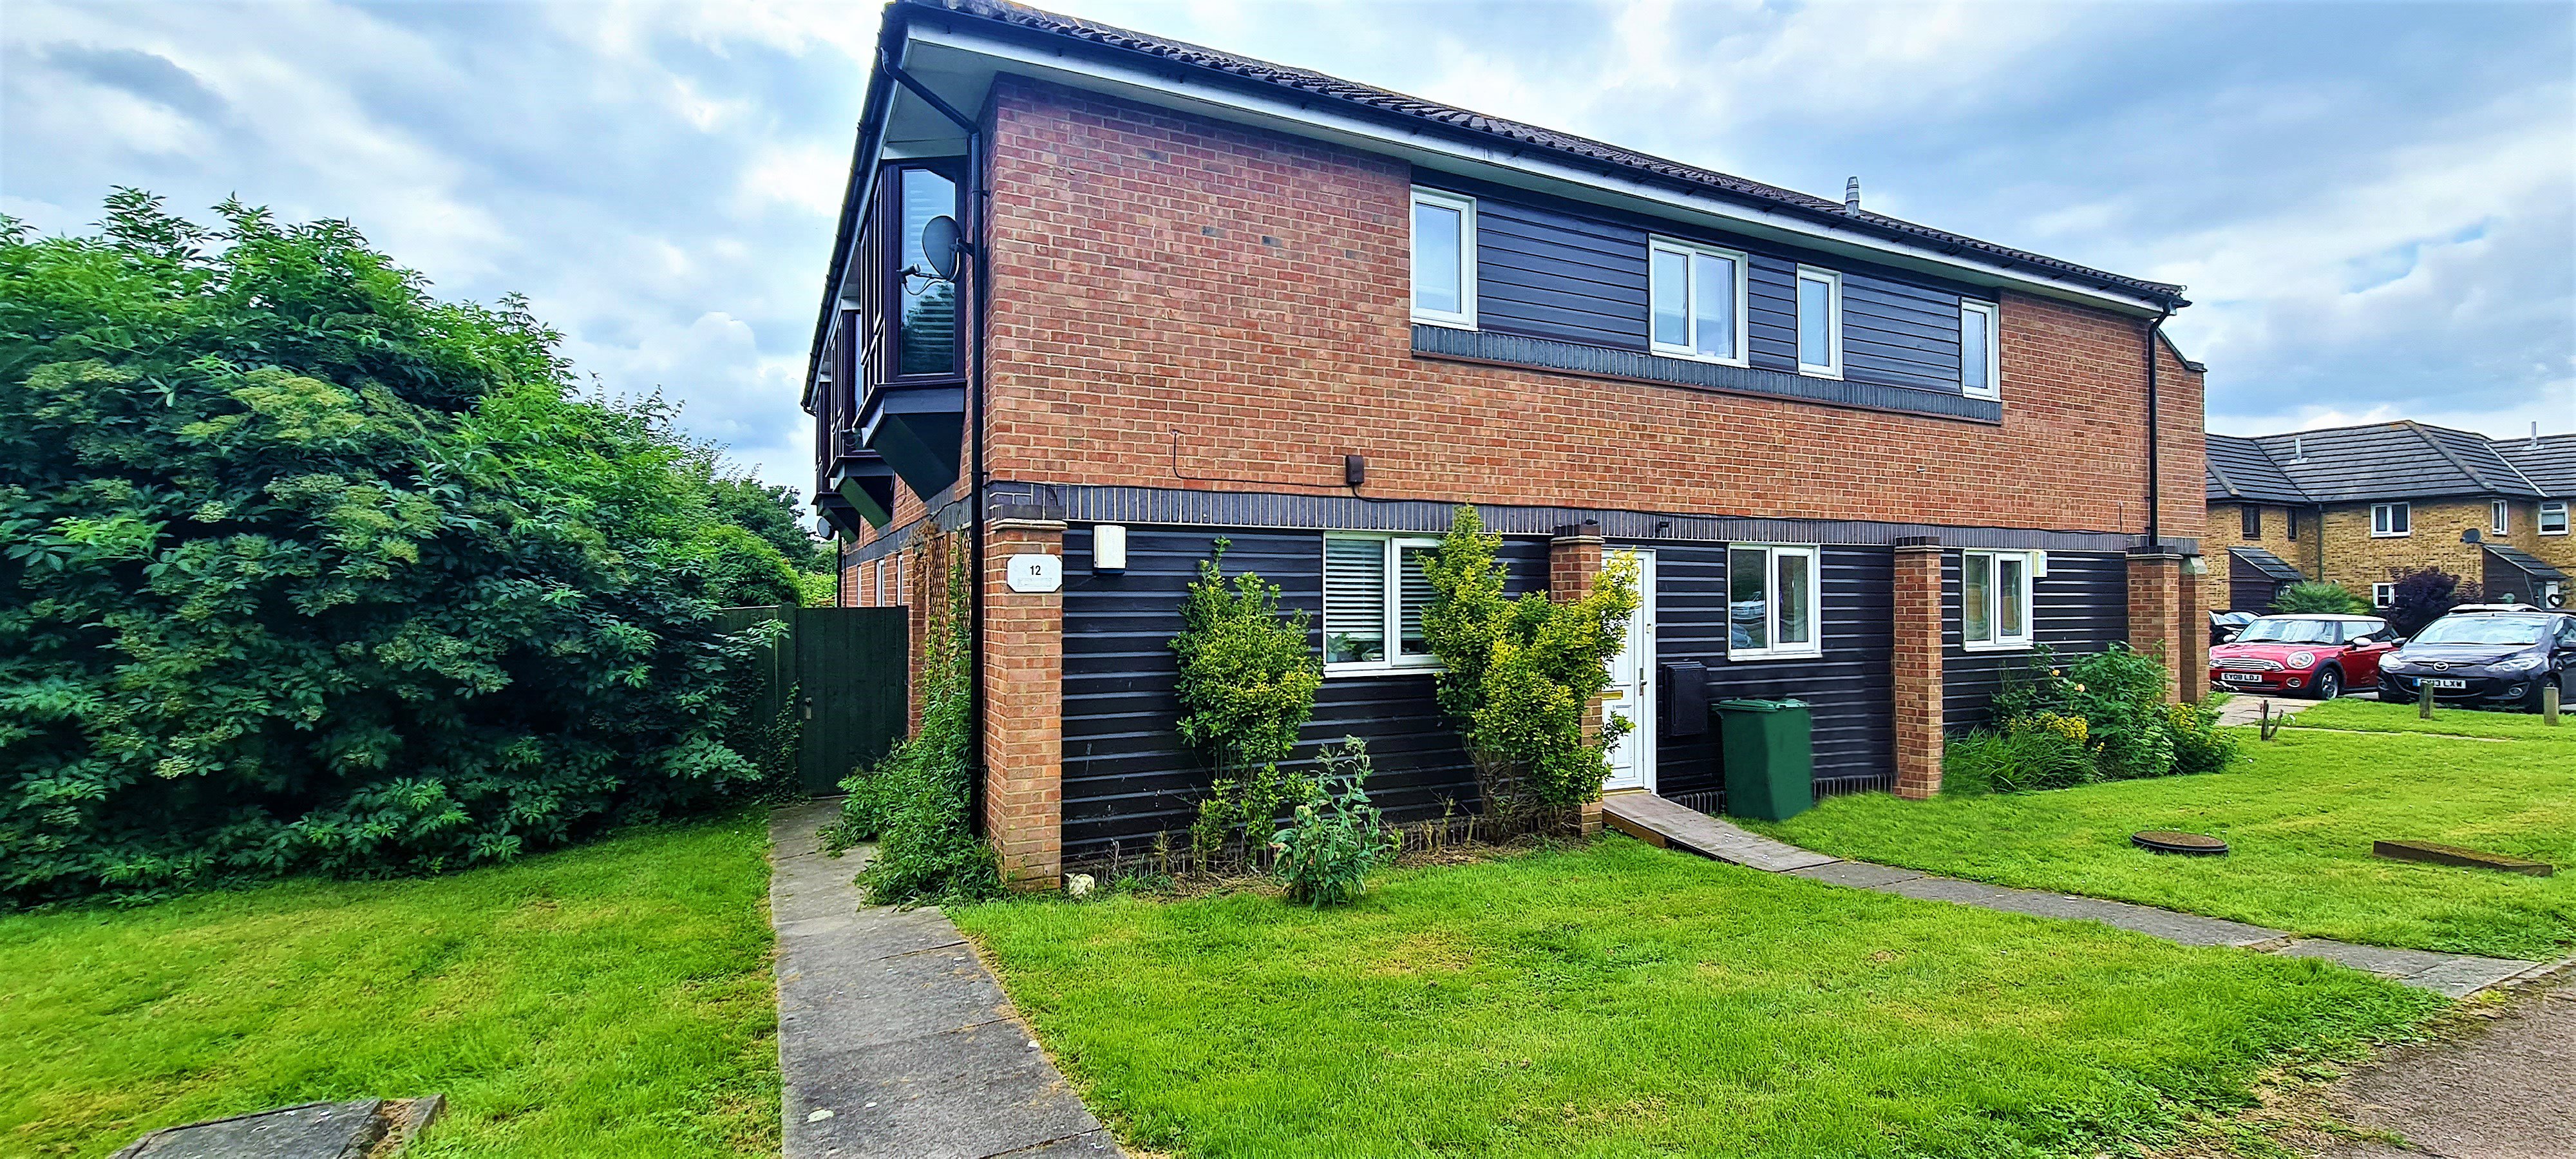 1 bed for sale in Orlando Drive, Basildon - Property Image 1